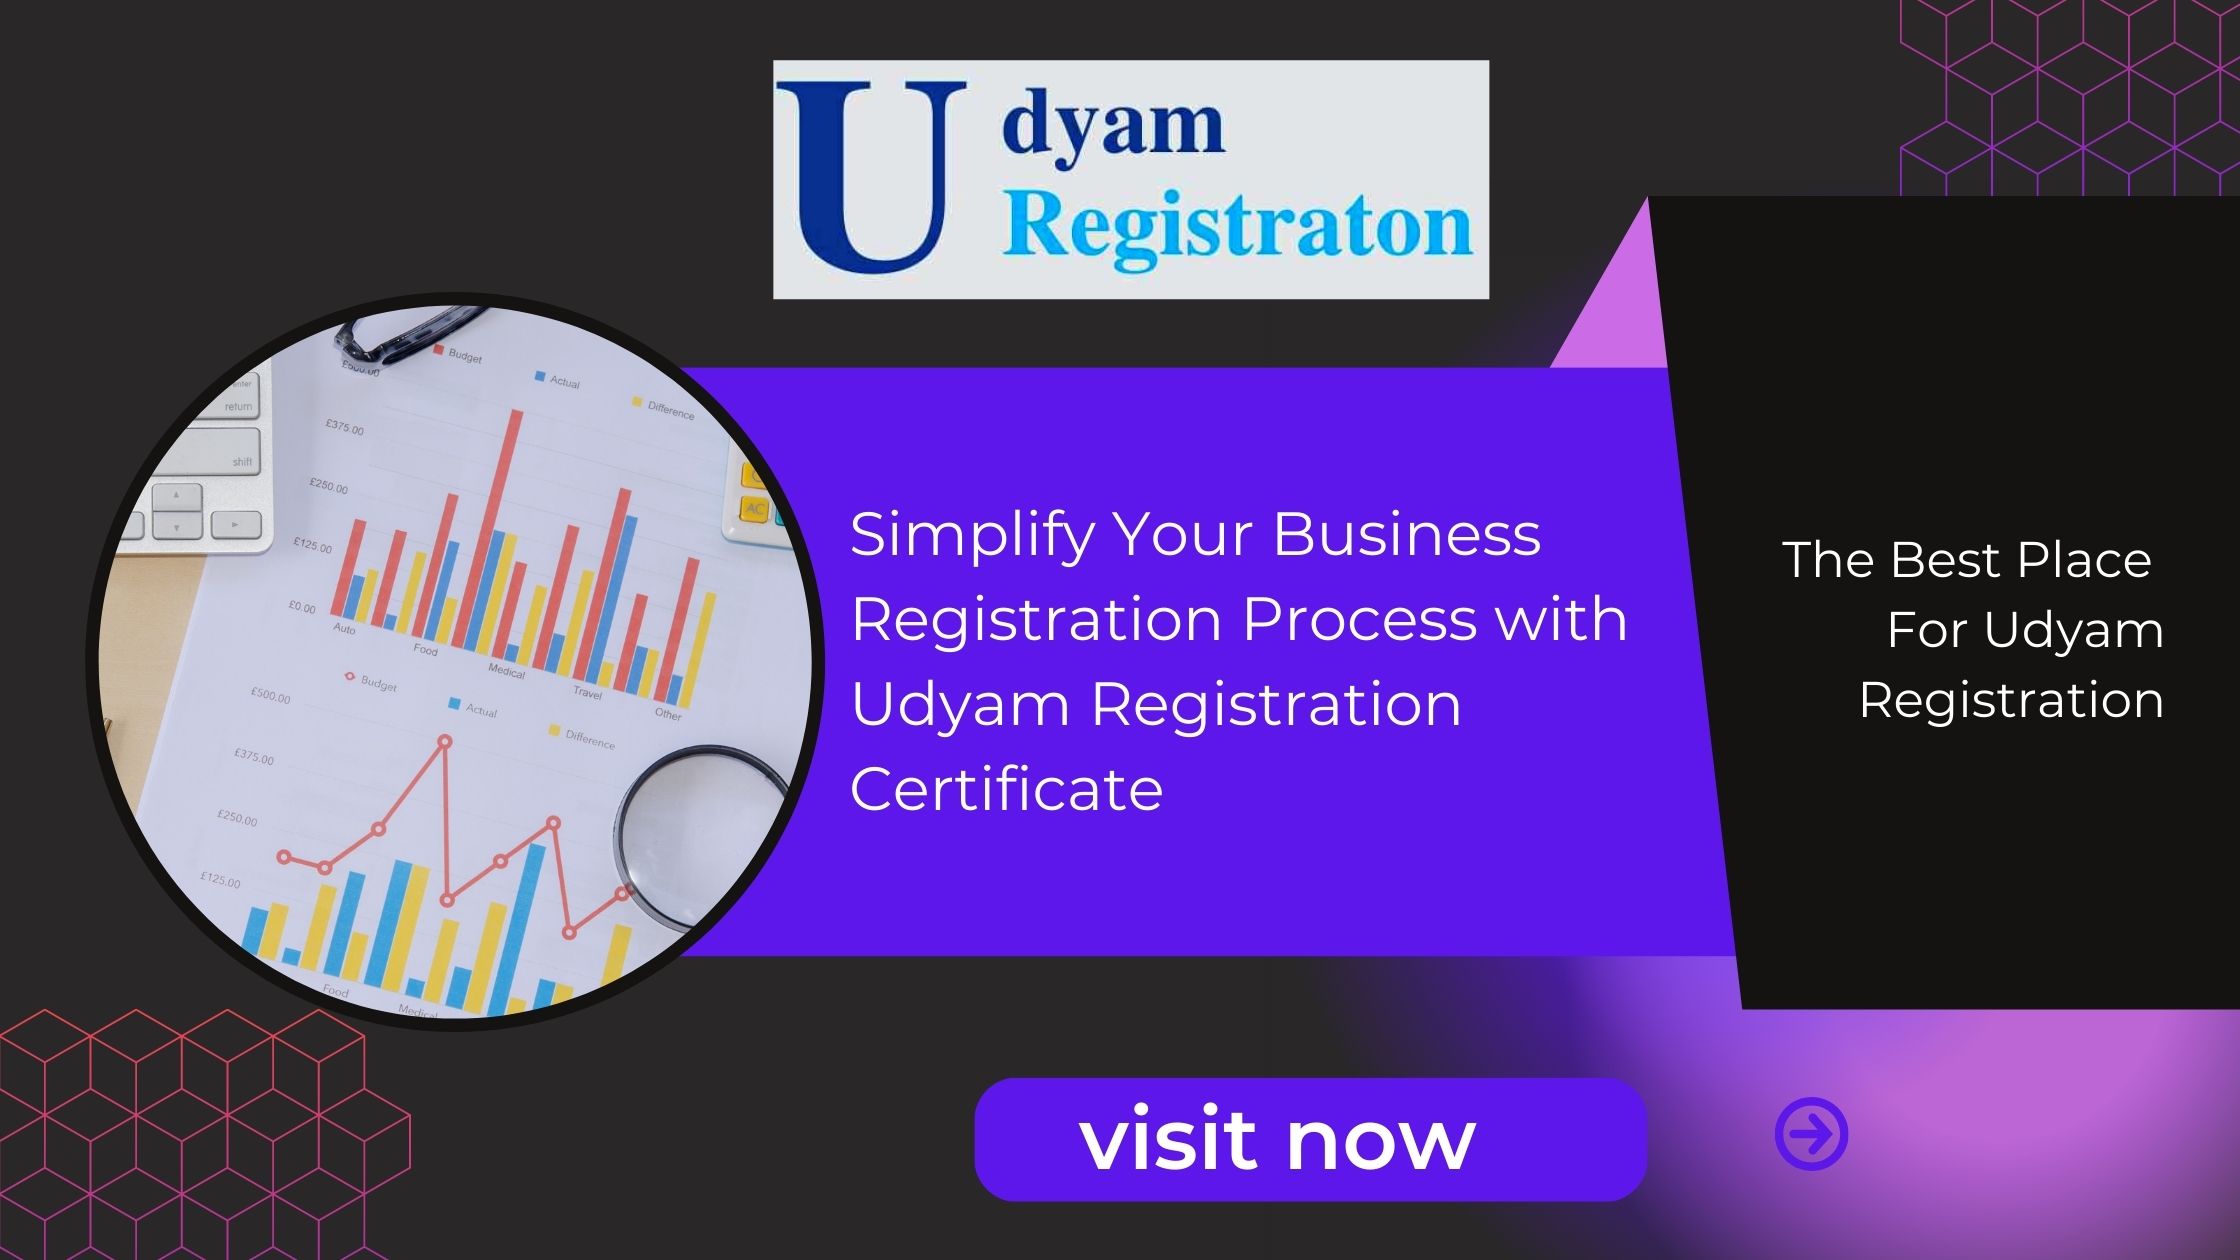 Simplify Your Business Registration Process with Udyam Registration Certificate